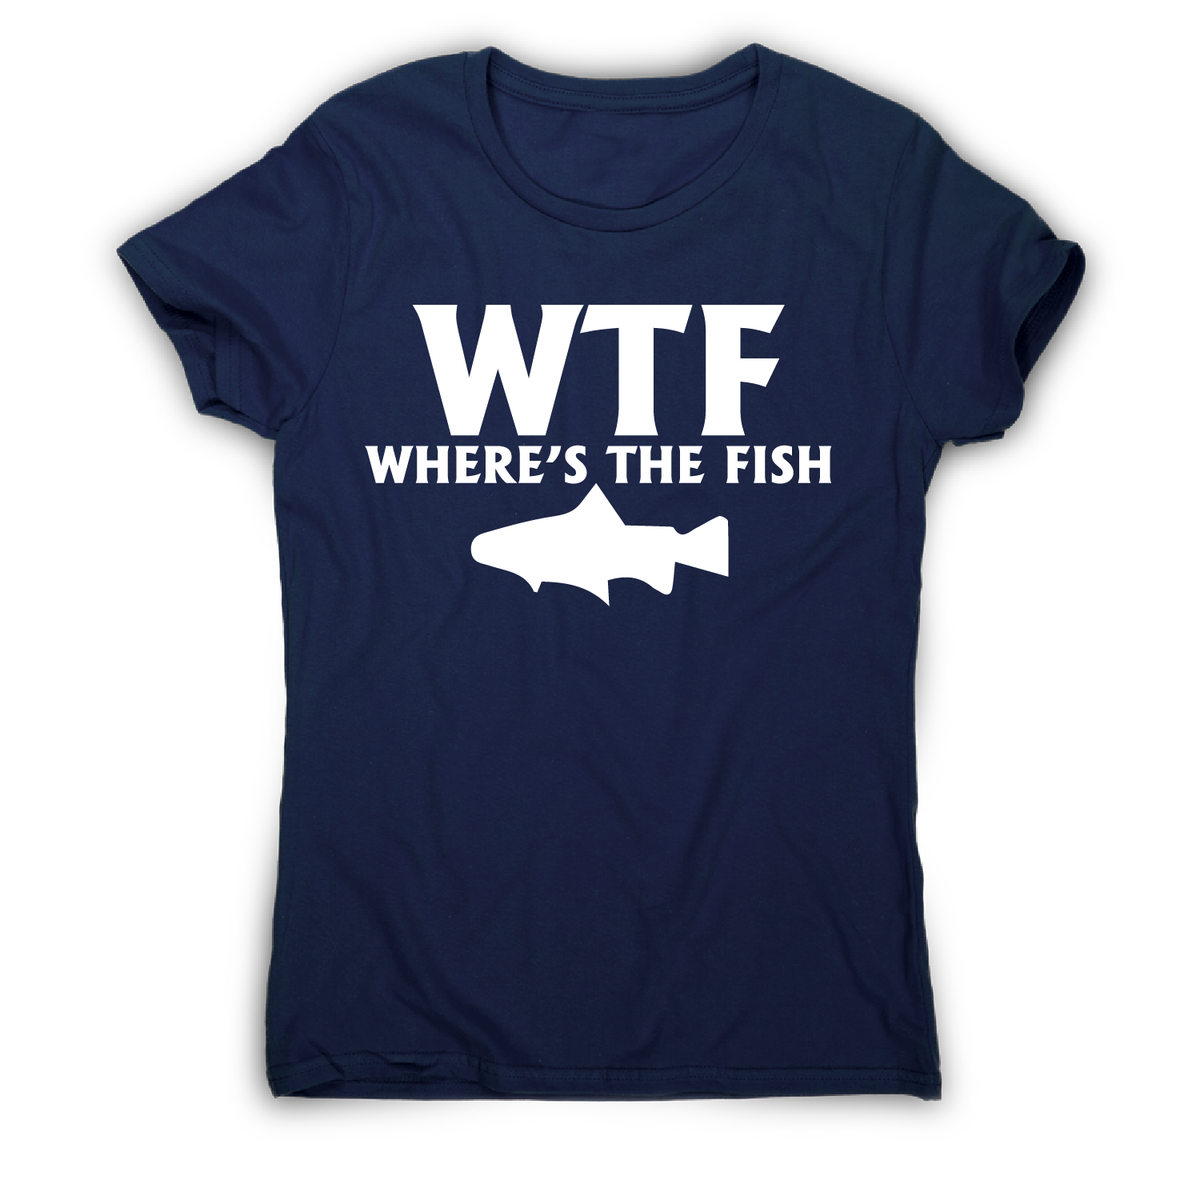 Wtf where's the fish funny fishing t-shirt women's– Graphic Gear